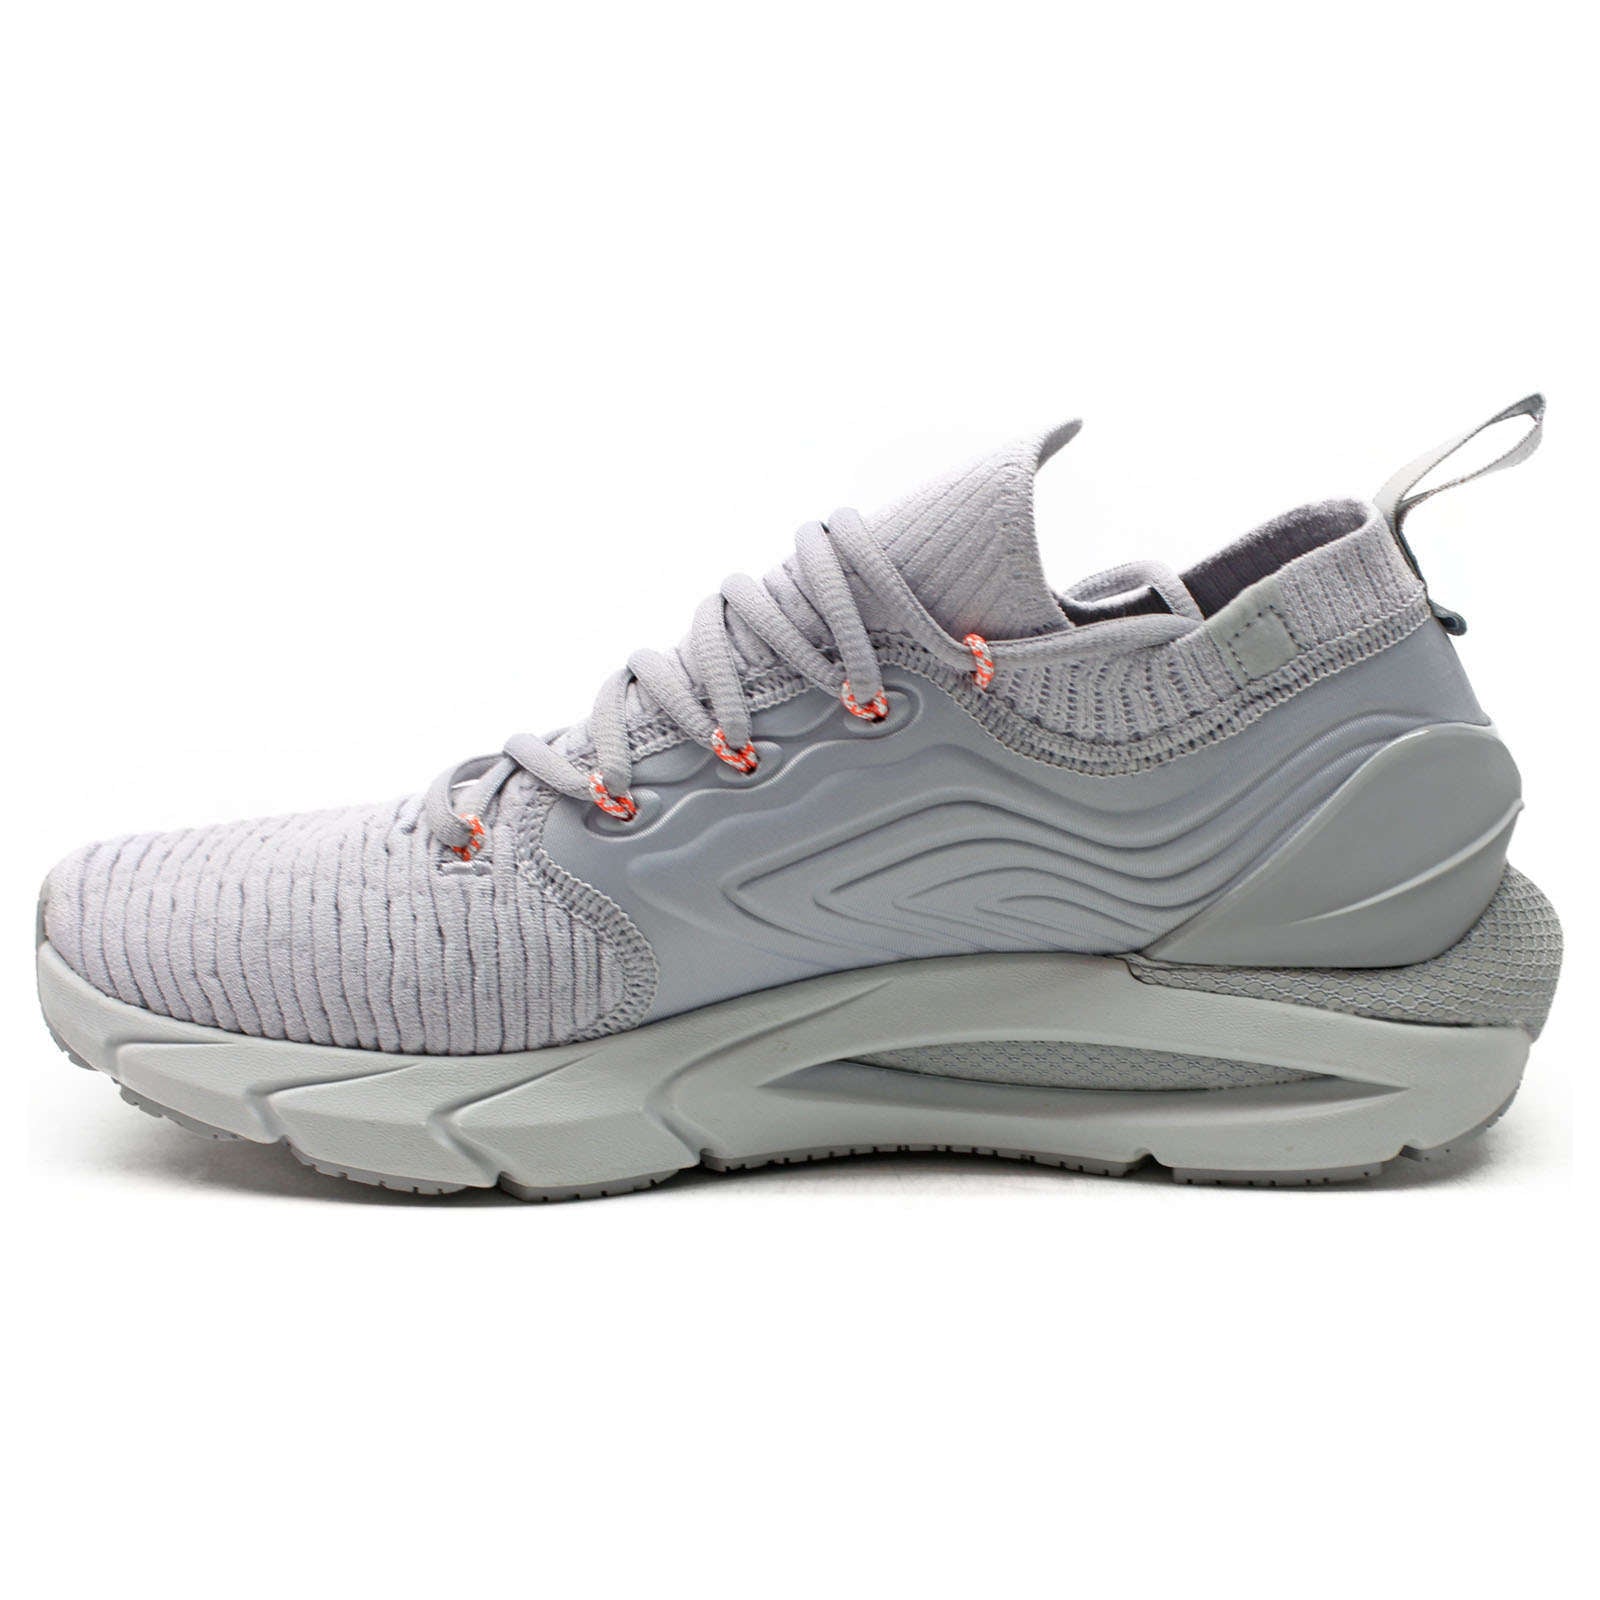 Under Armour HOVR Phantom 2 INKNT Synthetic Textile Men's Low-Top Sneakers#color_grey grey